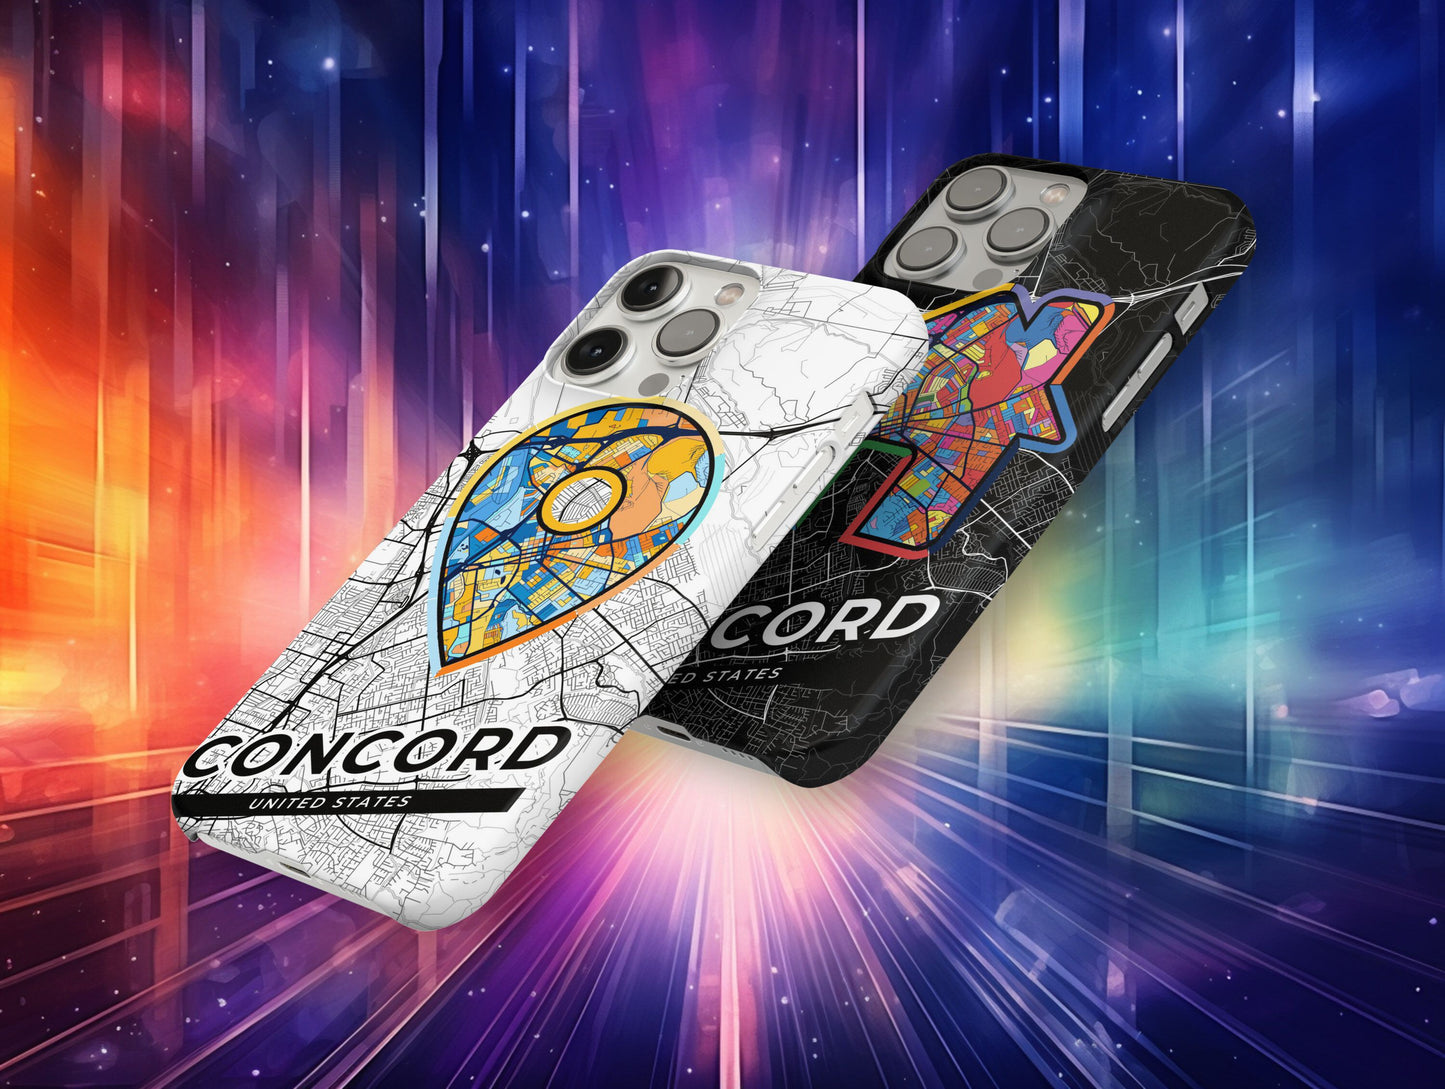 Concord California slim phone case with colorful icon. Birthday, wedding or housewarming gift. Couple match cases.